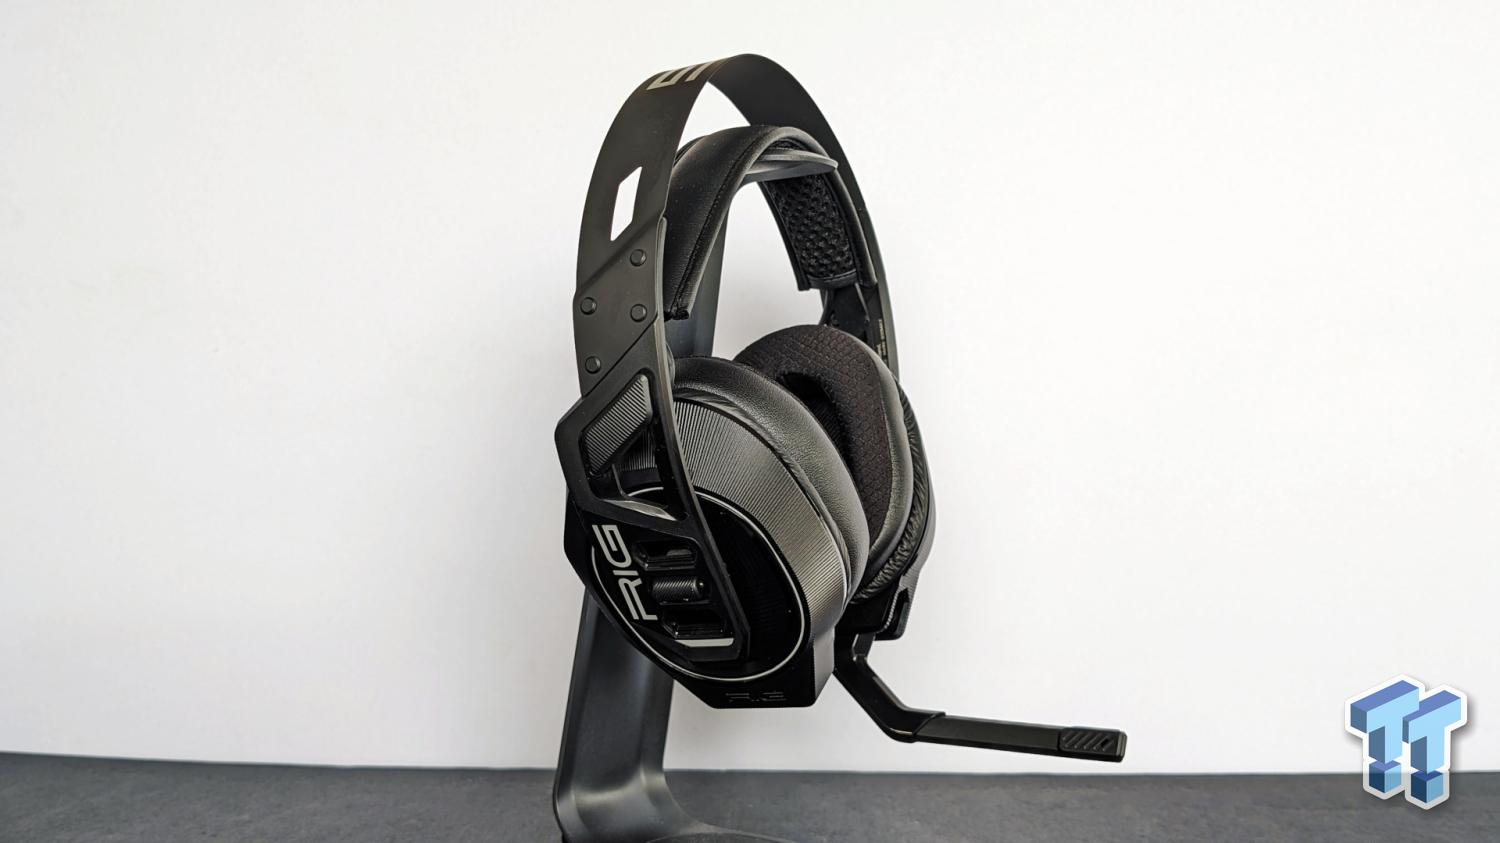 RIG 900 Max HX Dual Wireless Gaming Headset with Dolby Atmos